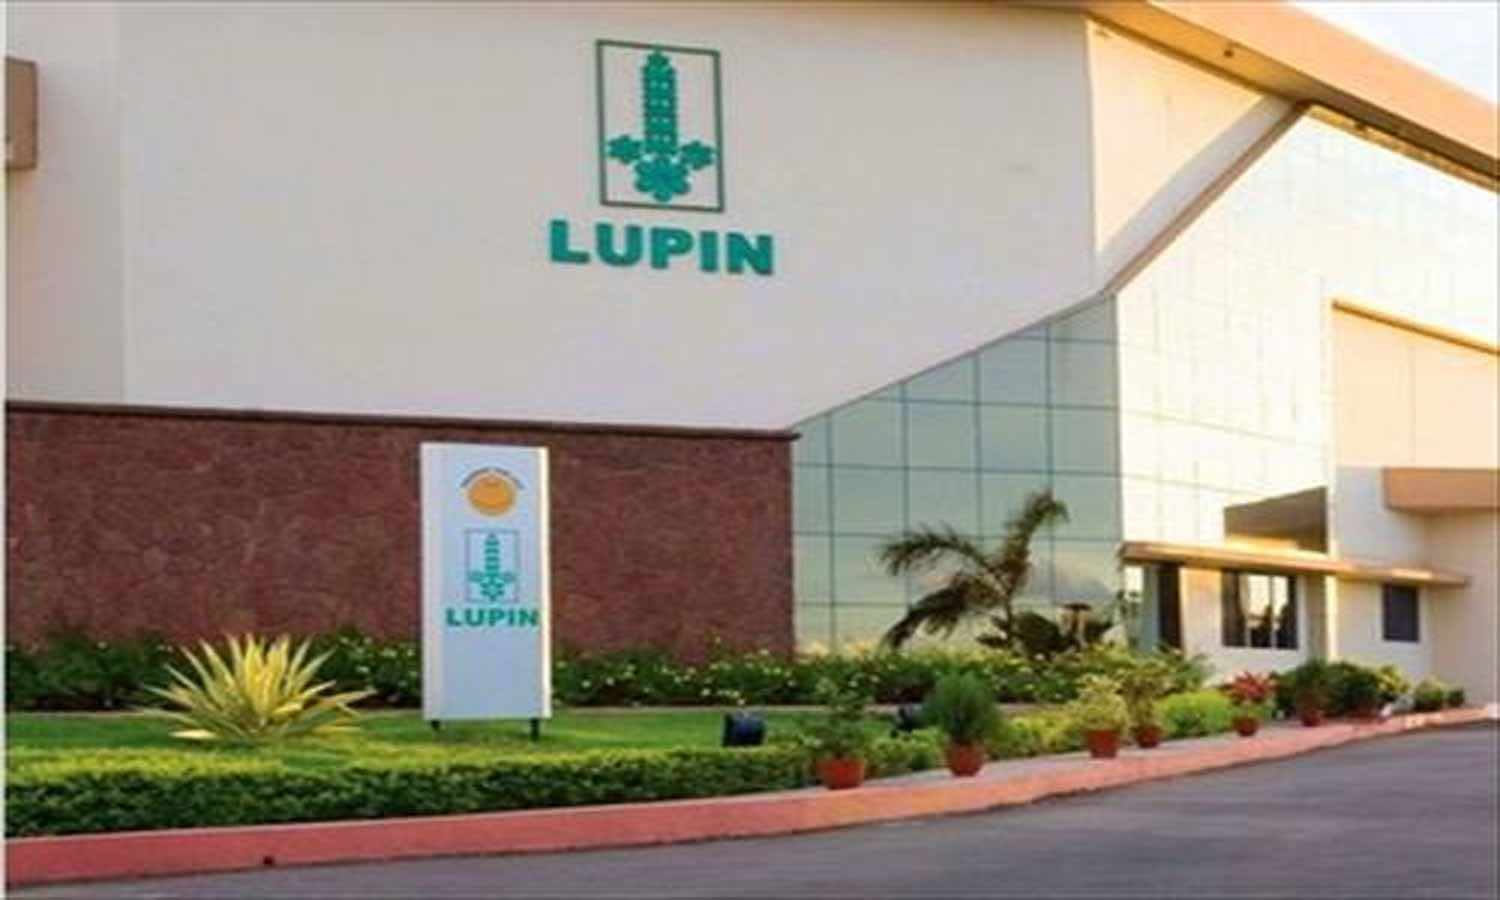 Lupin’s Goa plant receives 7 perceptions from USFDA, firm unperturbed